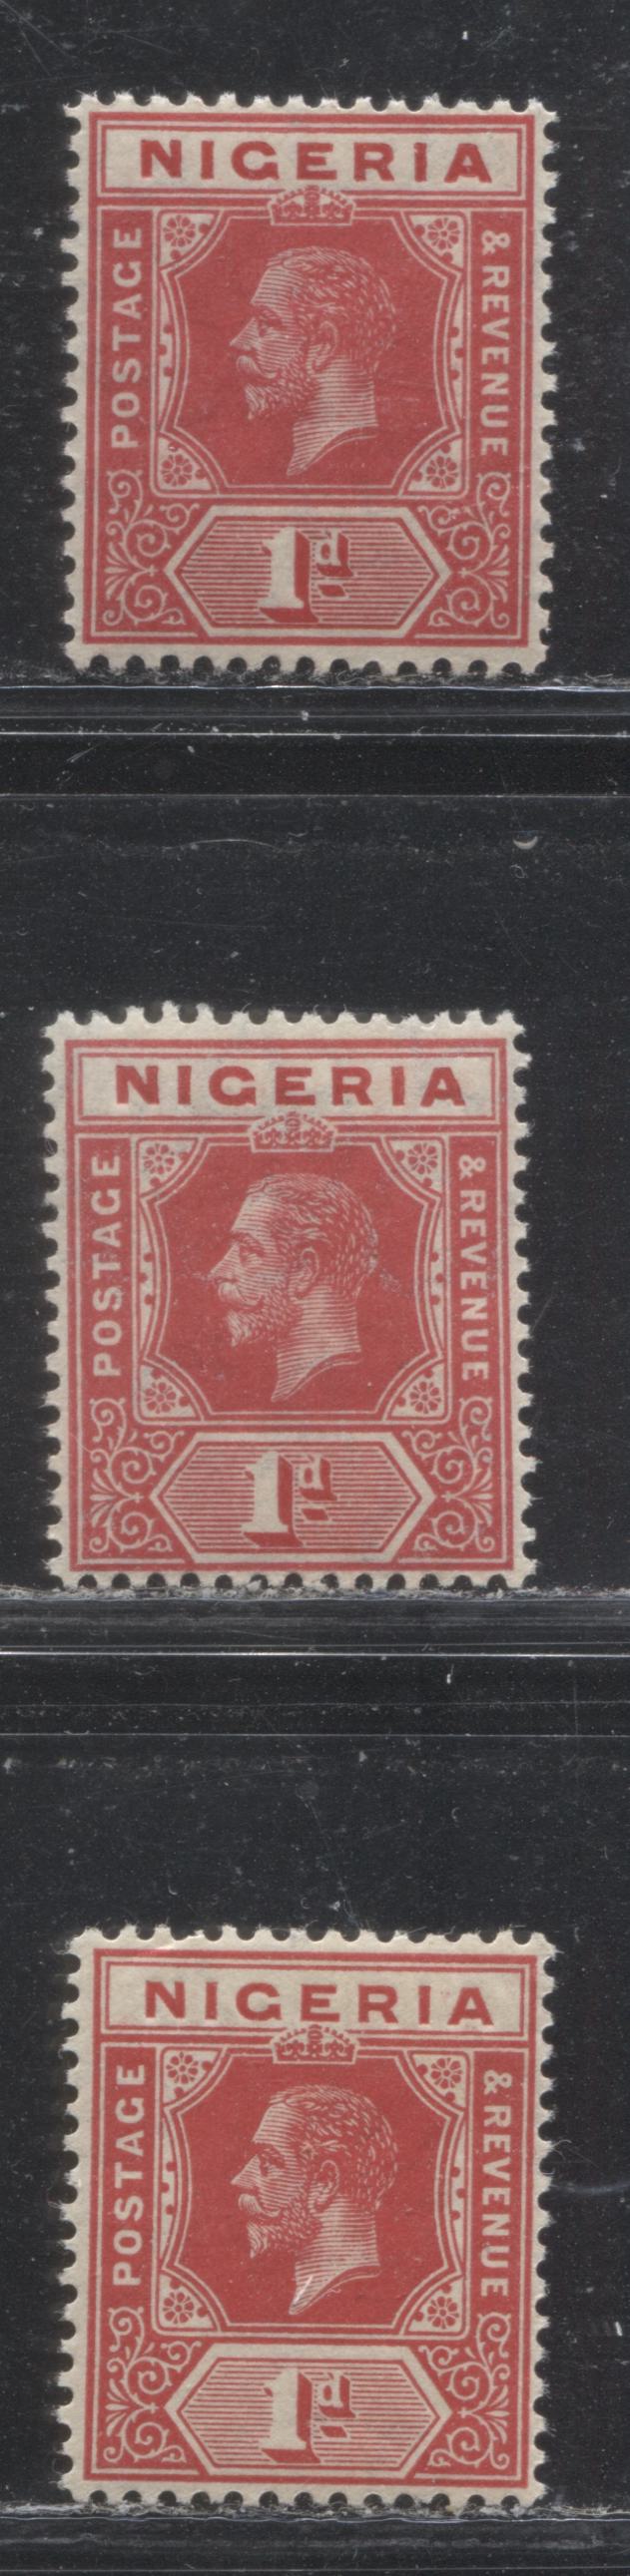 Lot 169 Nigeria SG# 2 1d Carmine Red King George V, 1914-1921 Multiple Crown CA Imperium Keyplate Issue, Three VFNH Examples, From Different Printings, Each a Slightly Different Shade